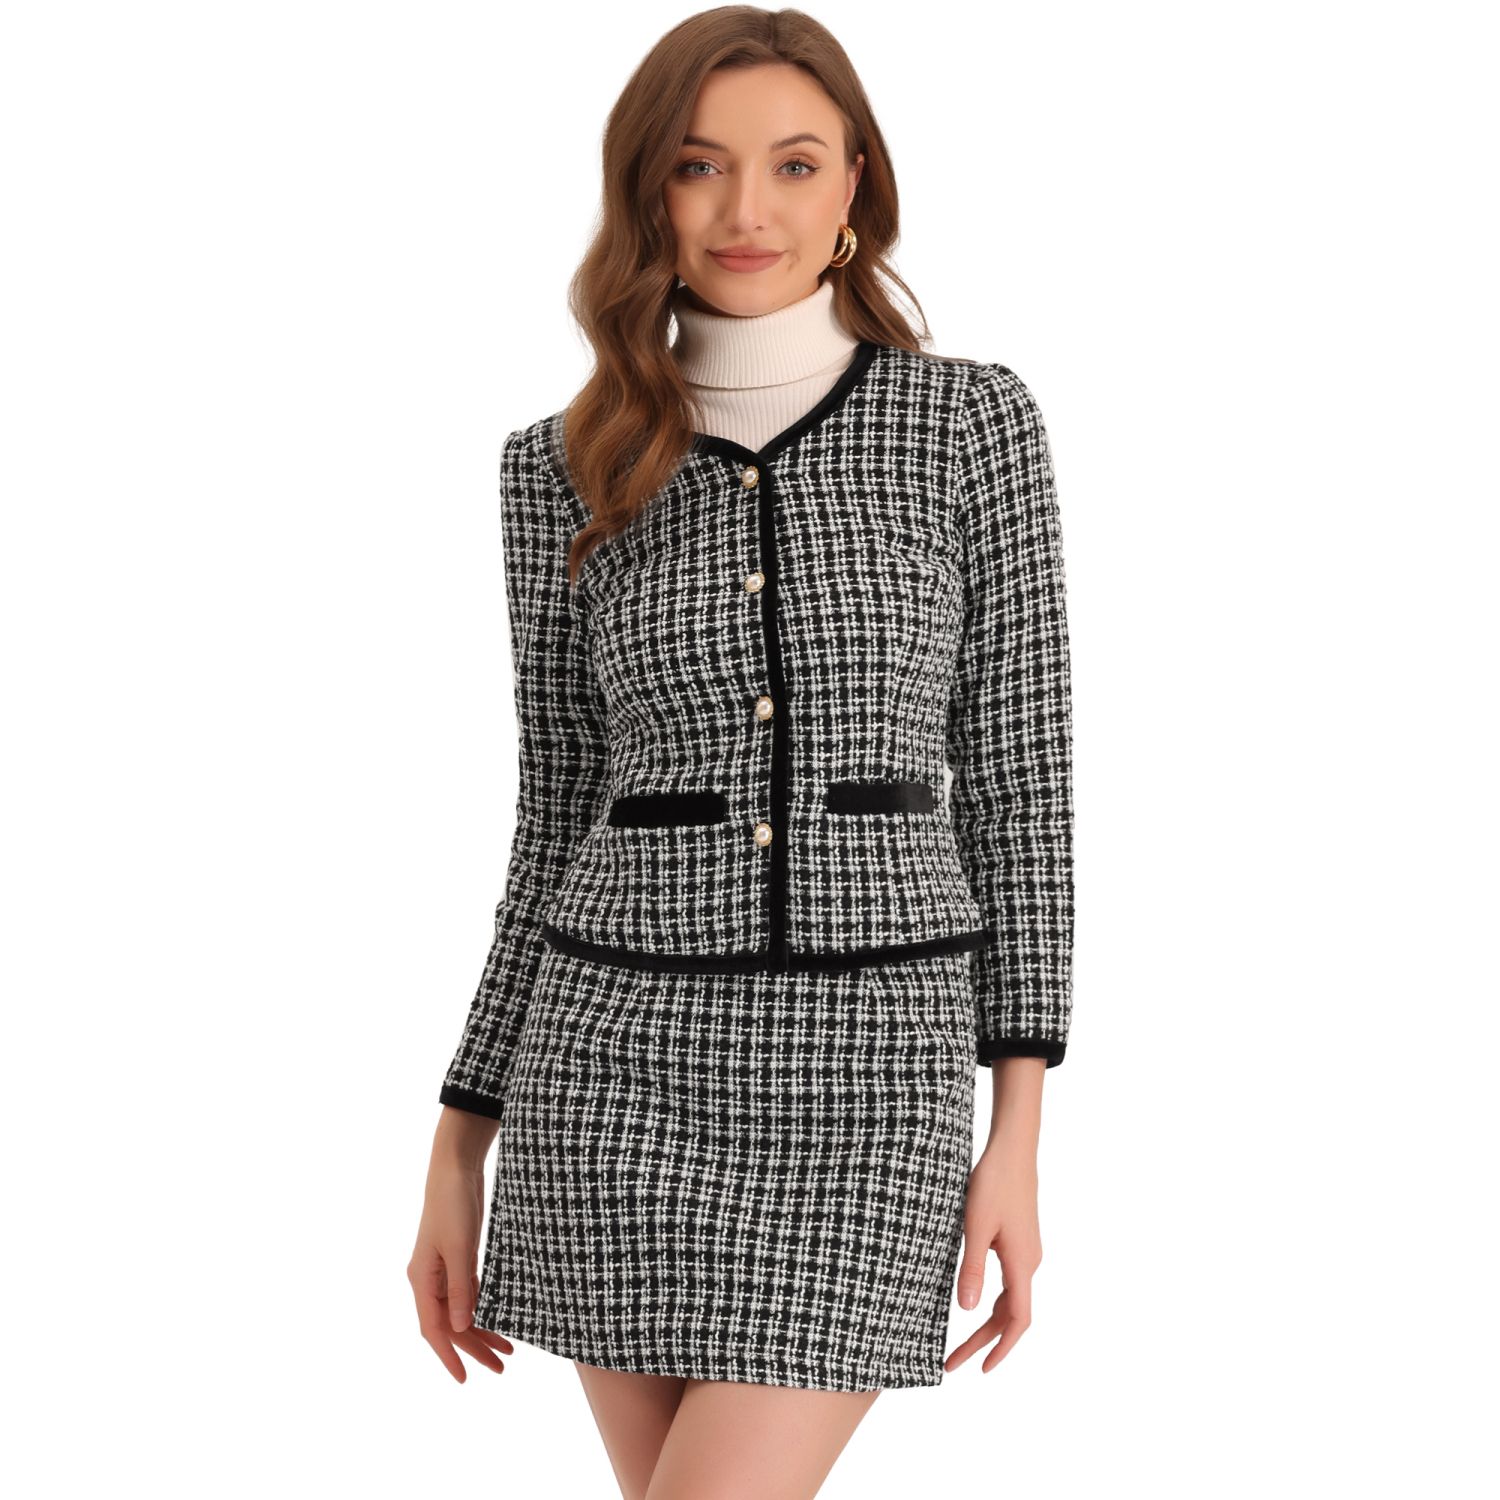 Houndstooth Skirt Suit for Women Mini Skirt Two Piece Set -  UK